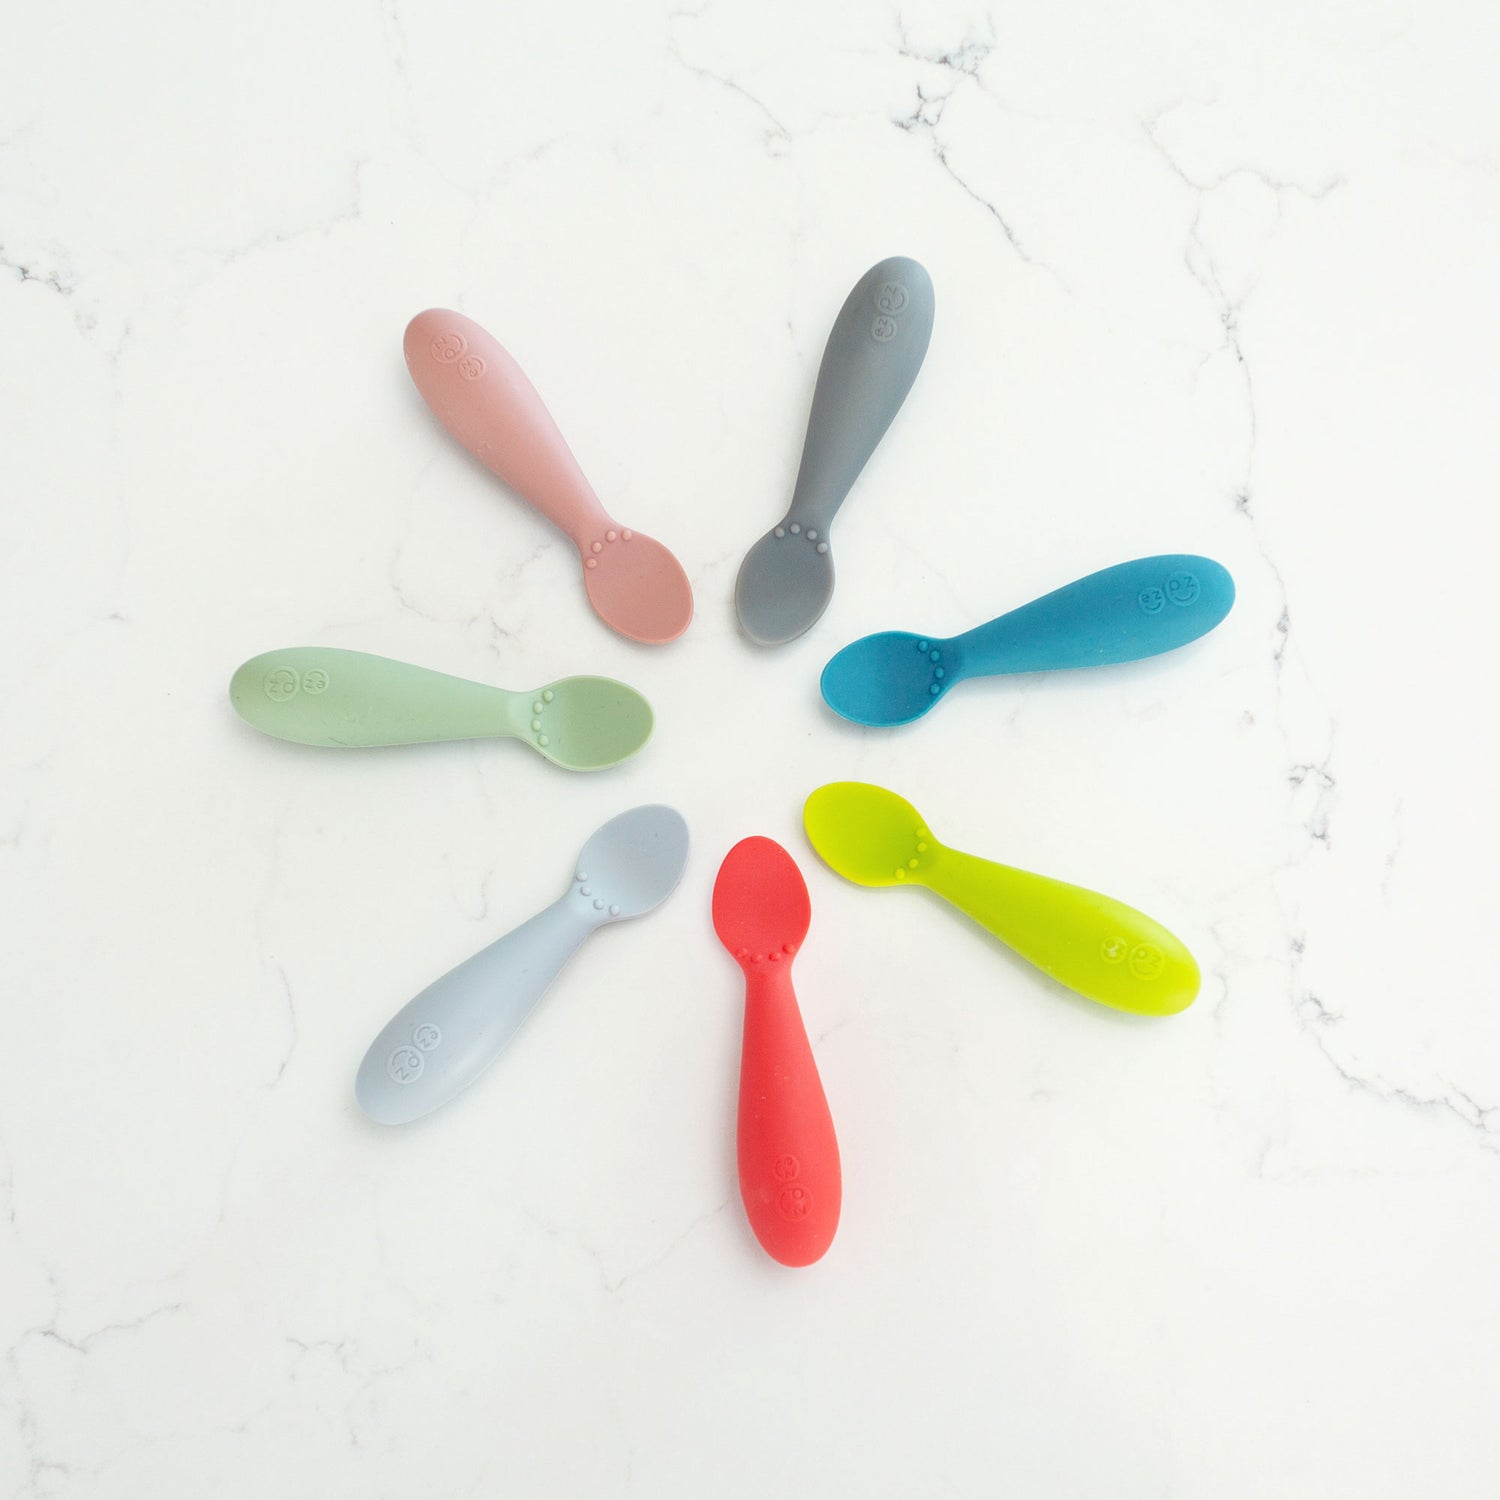 Tiny Spoon by EZPZ - 2-Pack - Silicone Spoons for Self-Feeding